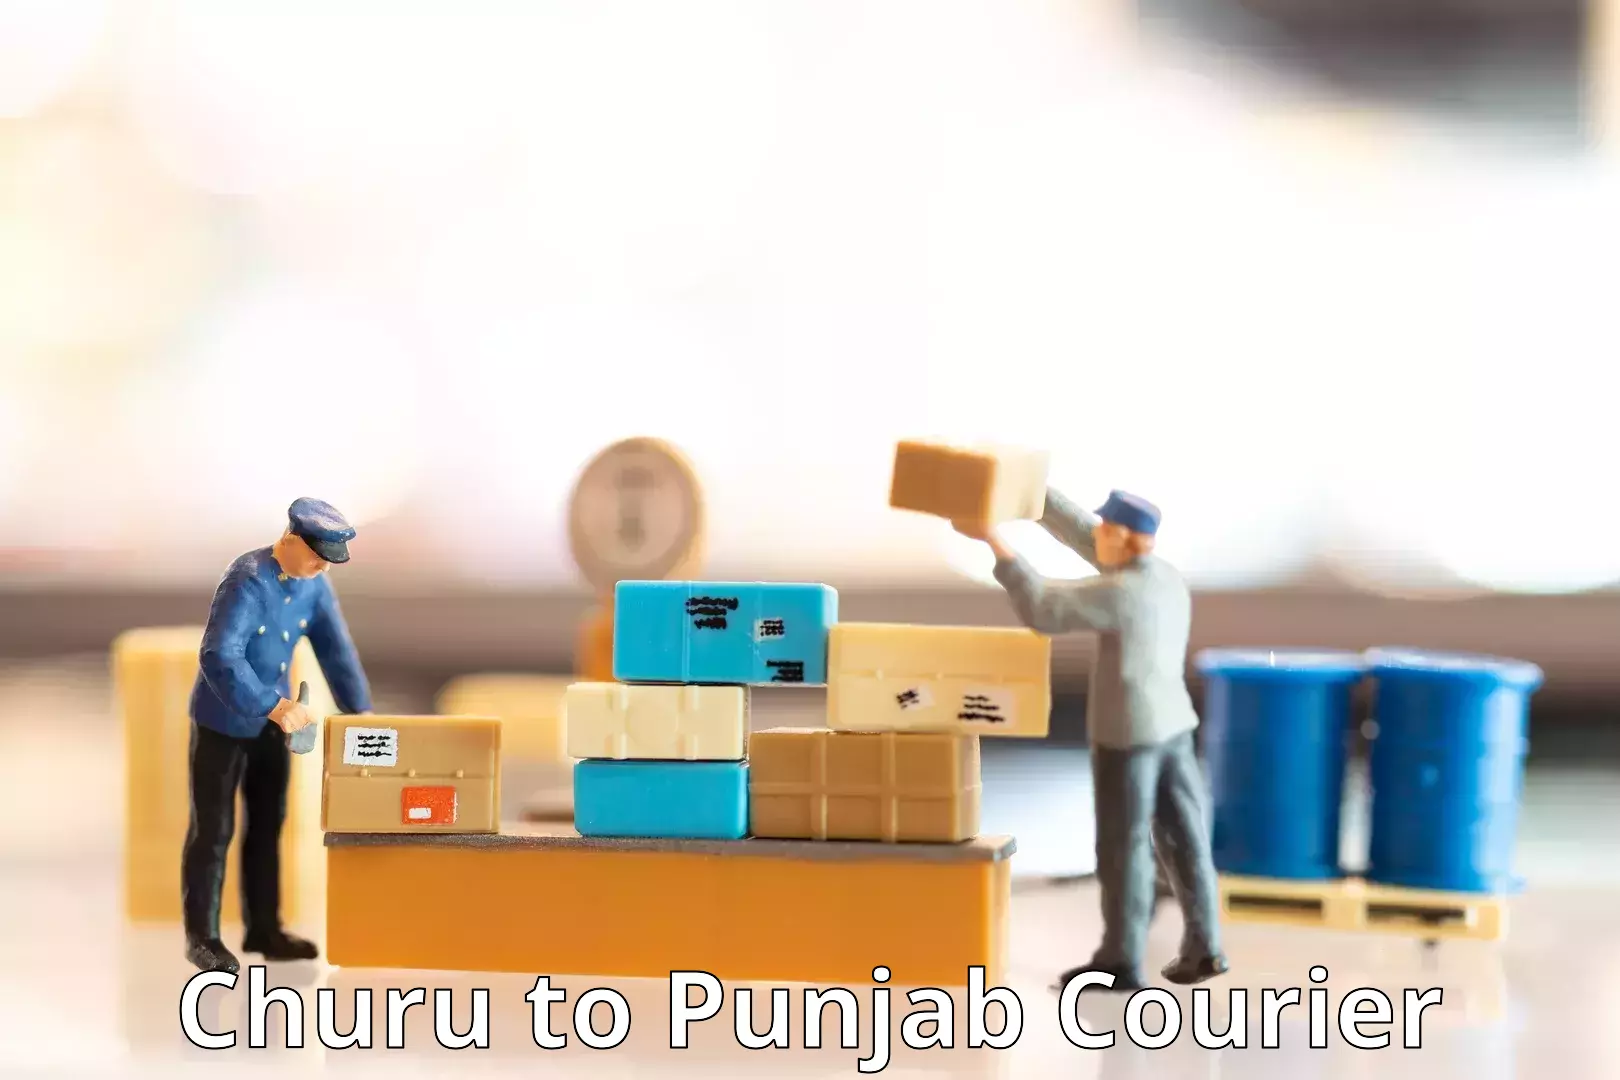 Personal courier services Churu to Firozpur